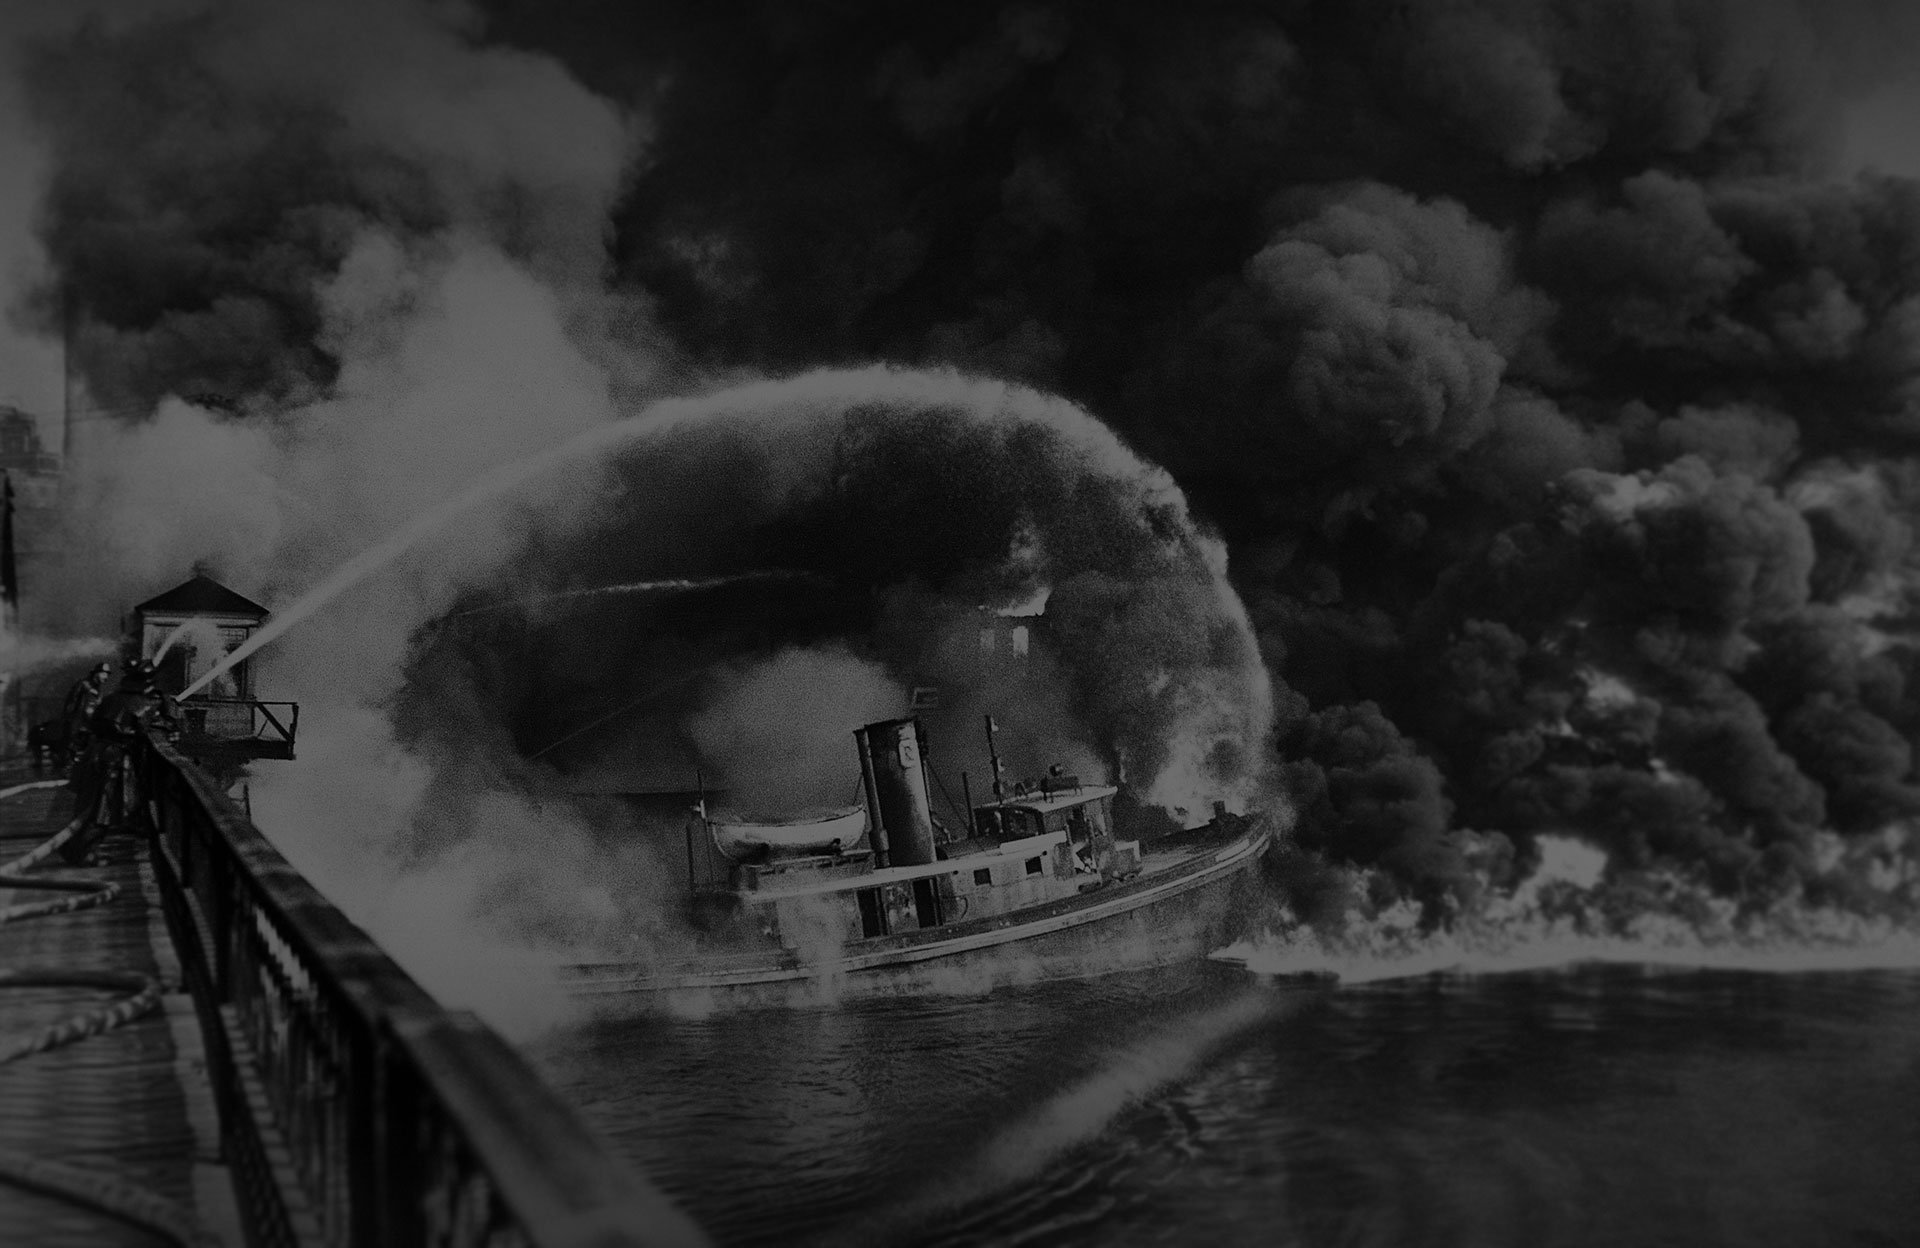 The Cuyahoga River had caught fire many times before 1969. Pictured are firefighters battling a blaze on the river in Cleveland in 1952.